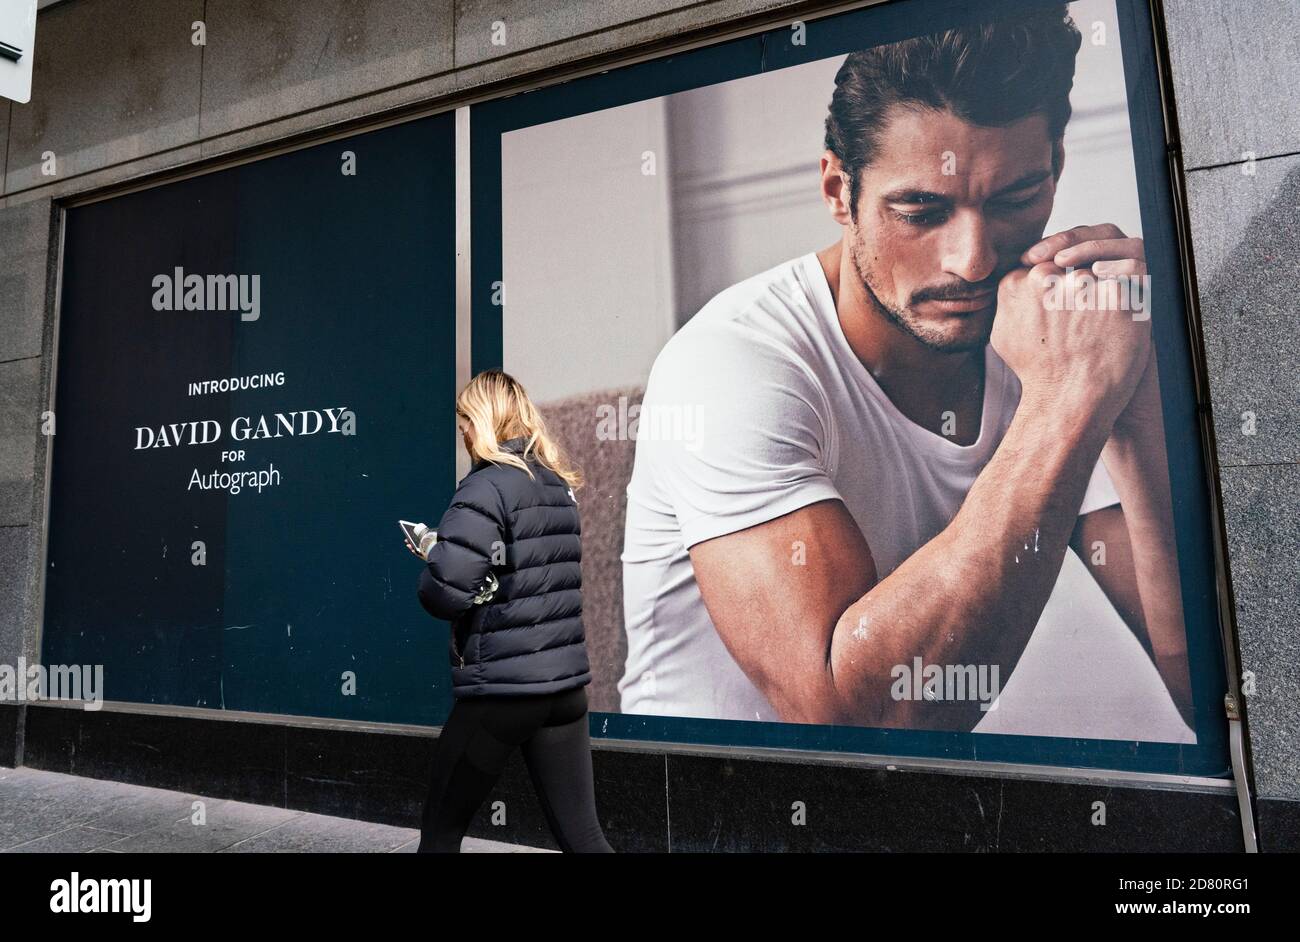 Glasgow, Scotland, UK. 26 October 2020. View of Glasgow city centre on weekday during circuit breaker lockdown with bars and restaurants closed. Pictured; Woman walks past billboard of David Gandy on Marks & Spencer store . Iain Masterton/Alamy Live News Stock Photo